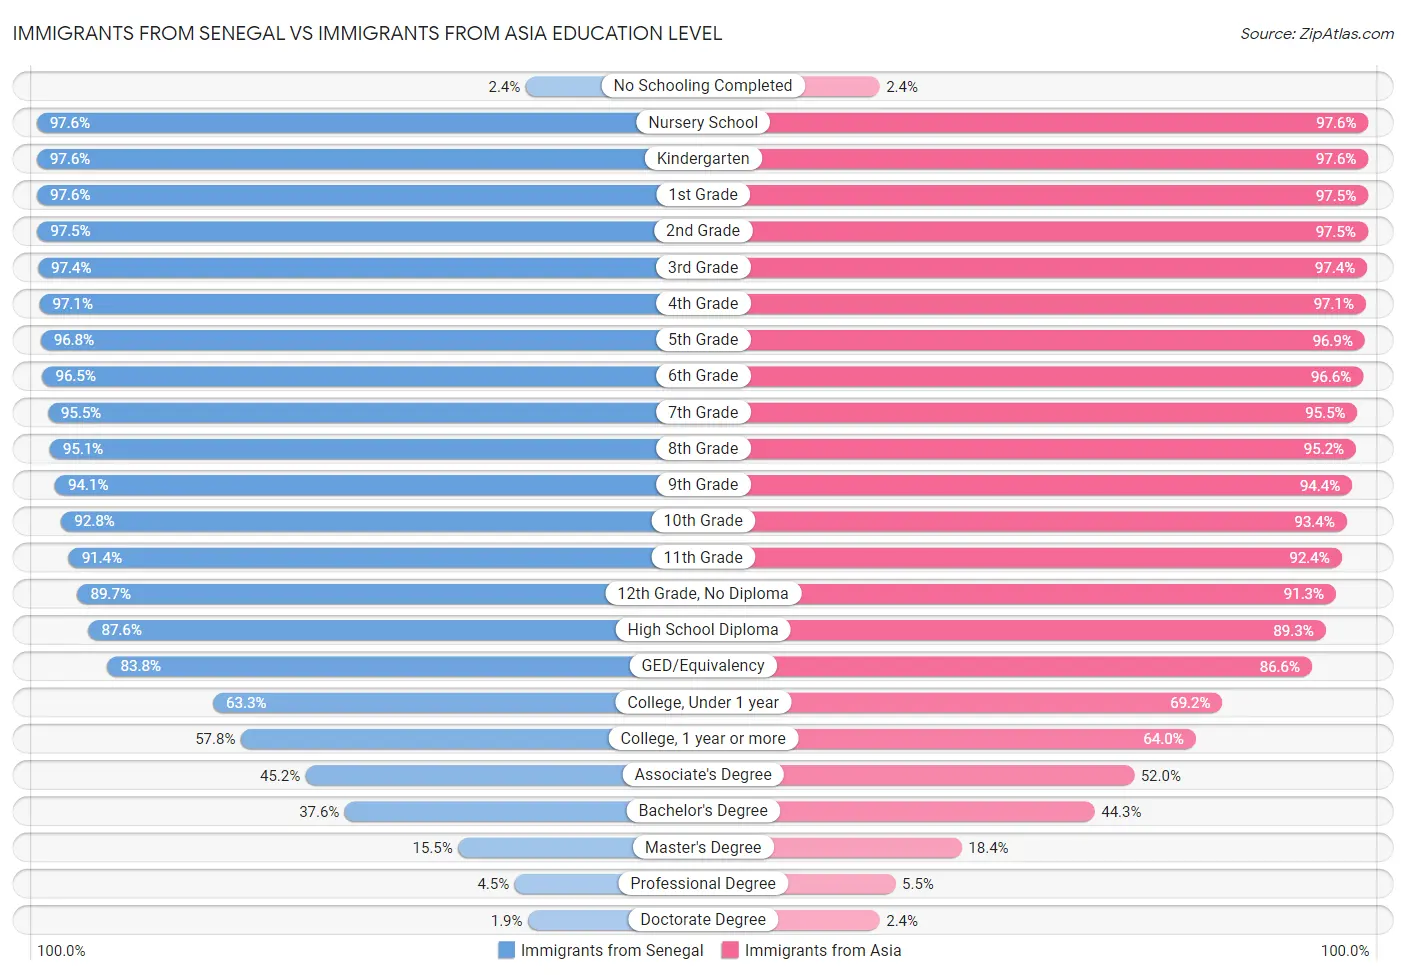 Immigrants from Senegal vs Immigrants from Asia Education Level